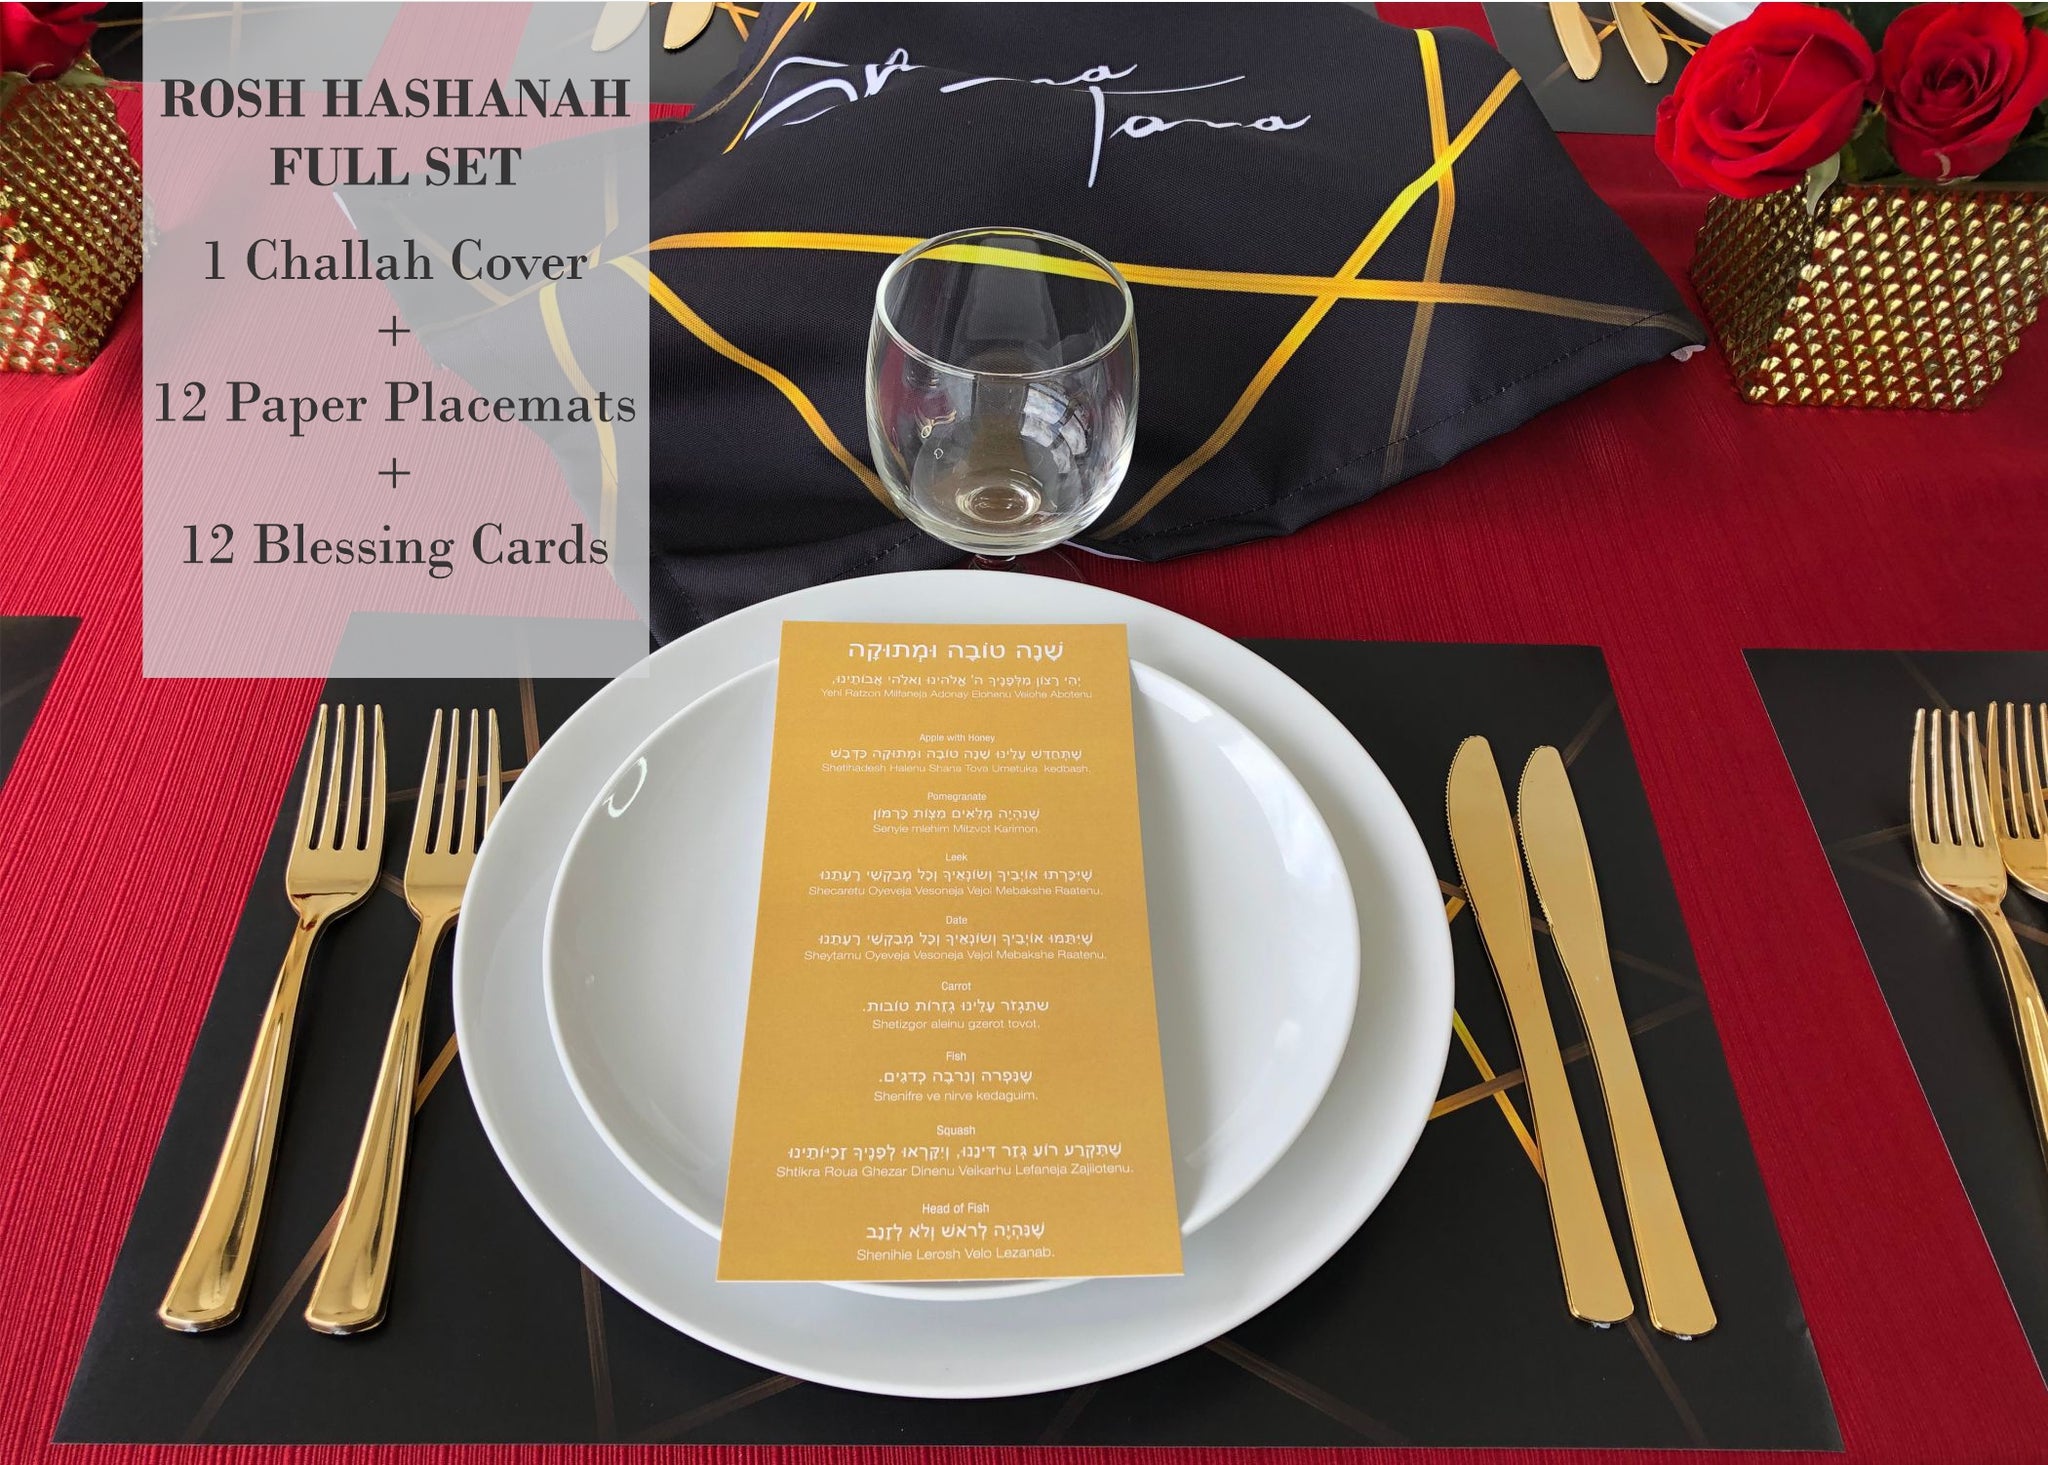 Full Set Rosh Hashanah blessing cards gold , Challah Cover and Placemats black and gold